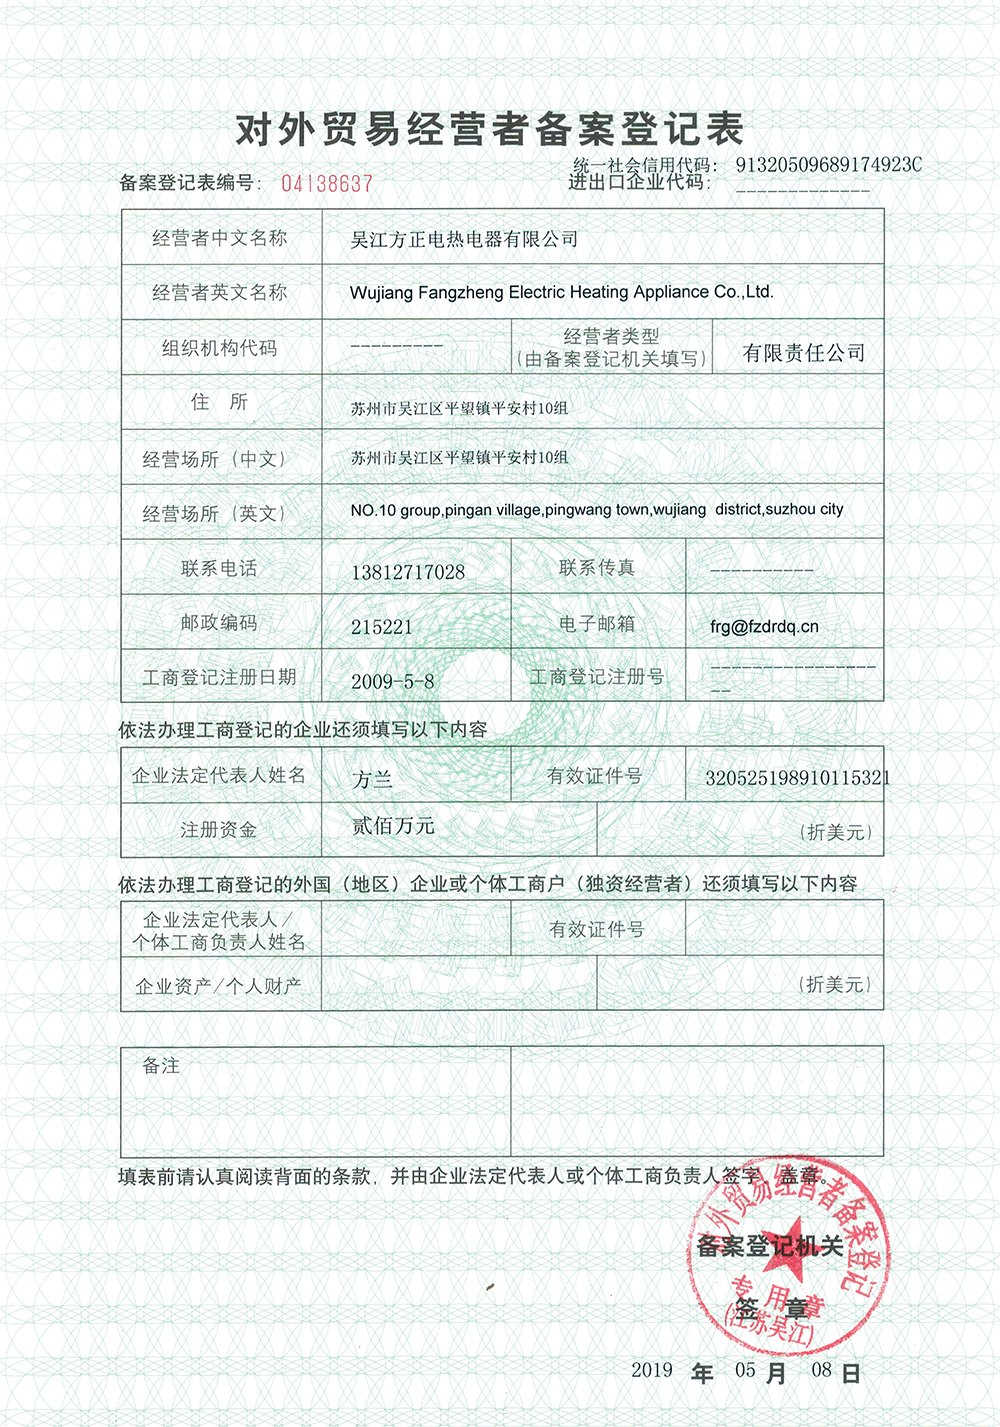 Import and export rights certificate